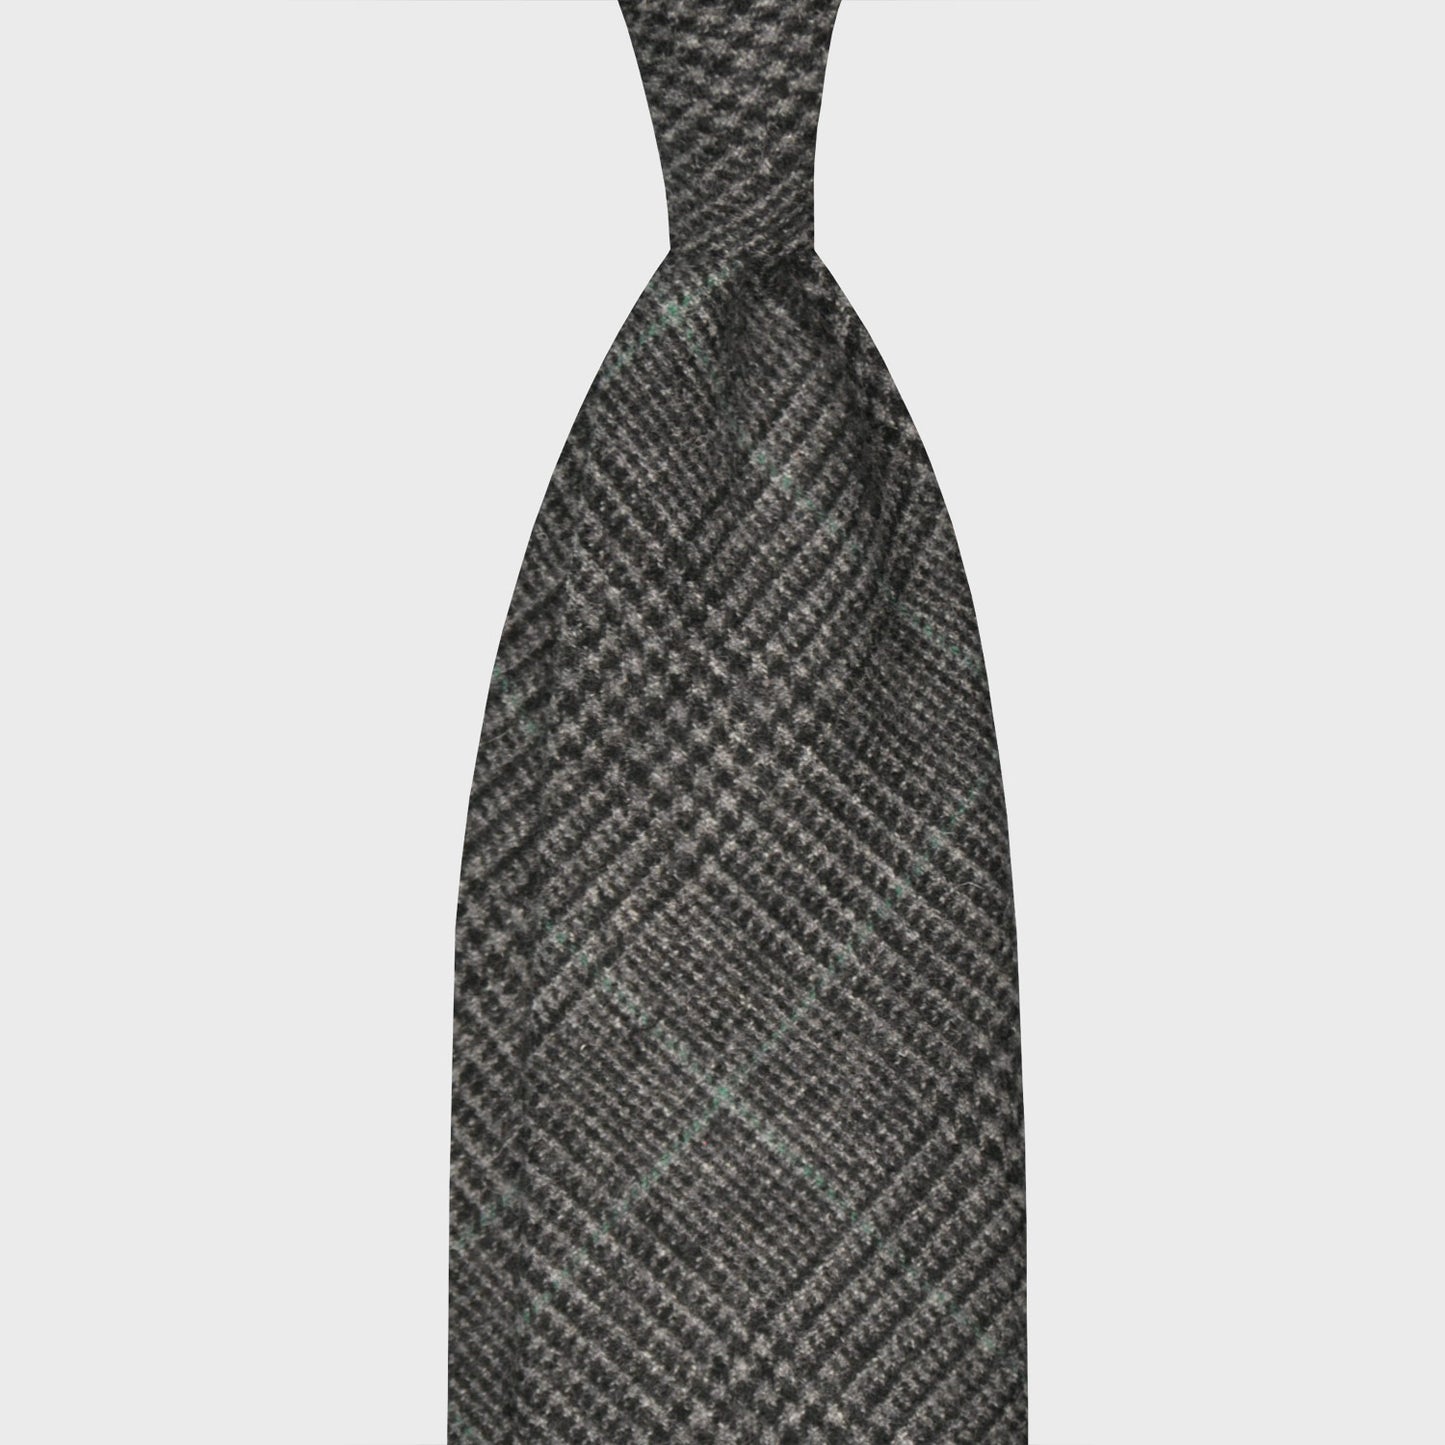 Anthracite Grey Glen Check Wool Tie Unlined F.Marino Napoli. Glen check wool, handmade unlined tie, f marino napoli for Wools Boutique Uomo, anthracite and light grey Prince of Wales pattern, teal green micro windowpane pattern